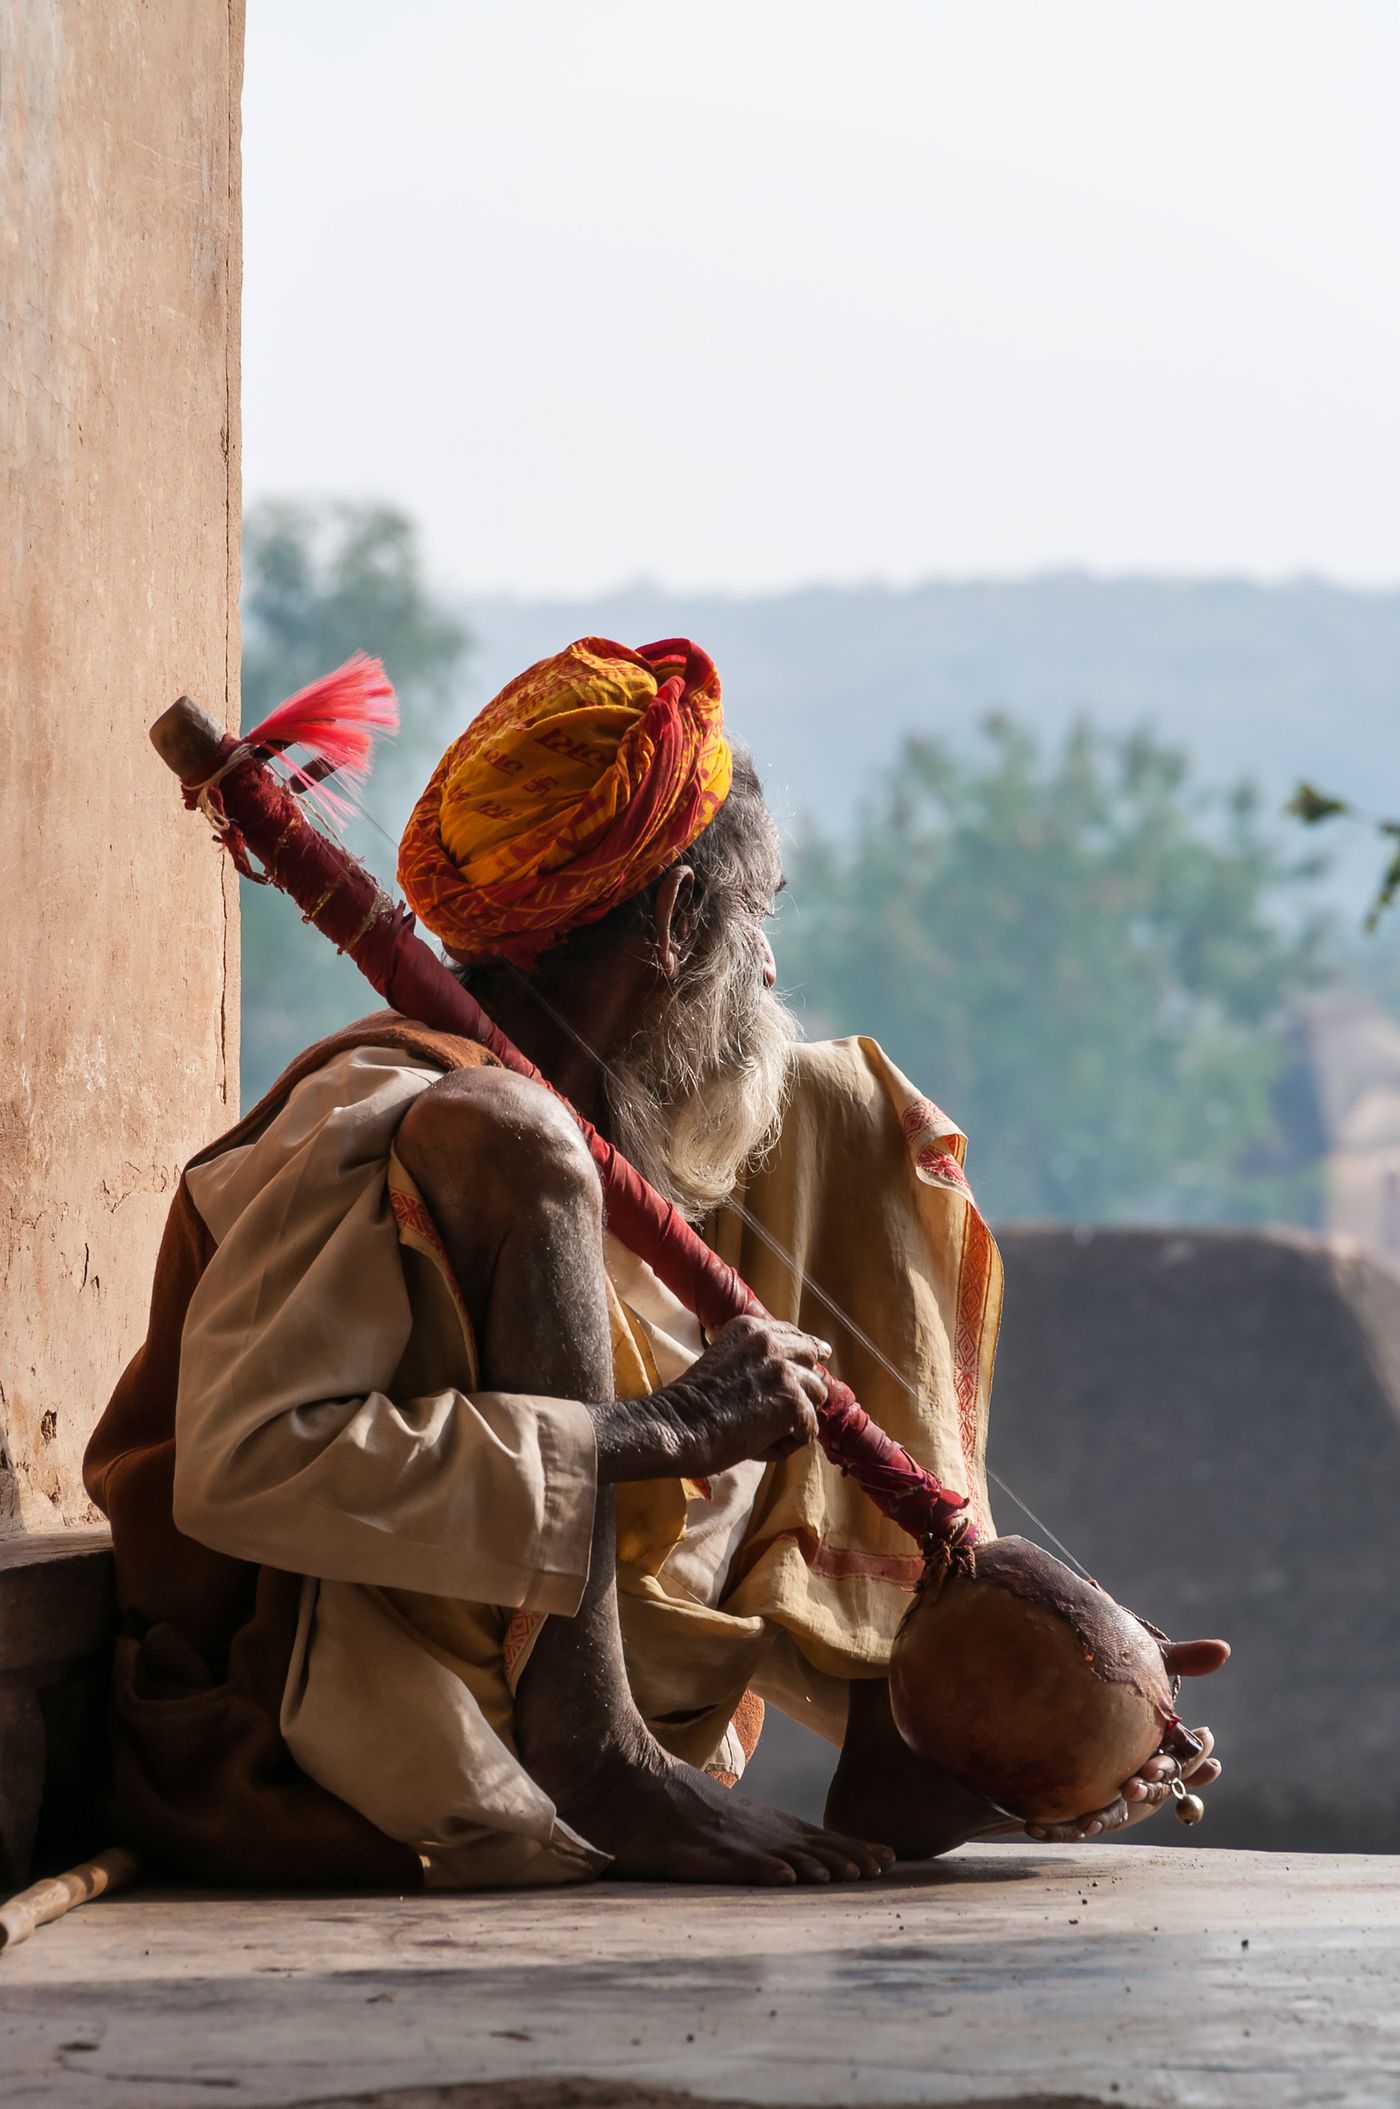 An unidentified Indian sadhu playing tumbi near the window of the Chaturbhuj Temple in Orchha, Madhya Pradesh. The tumbi is an ancient musical instrument in India which originates from the state of Punjab 